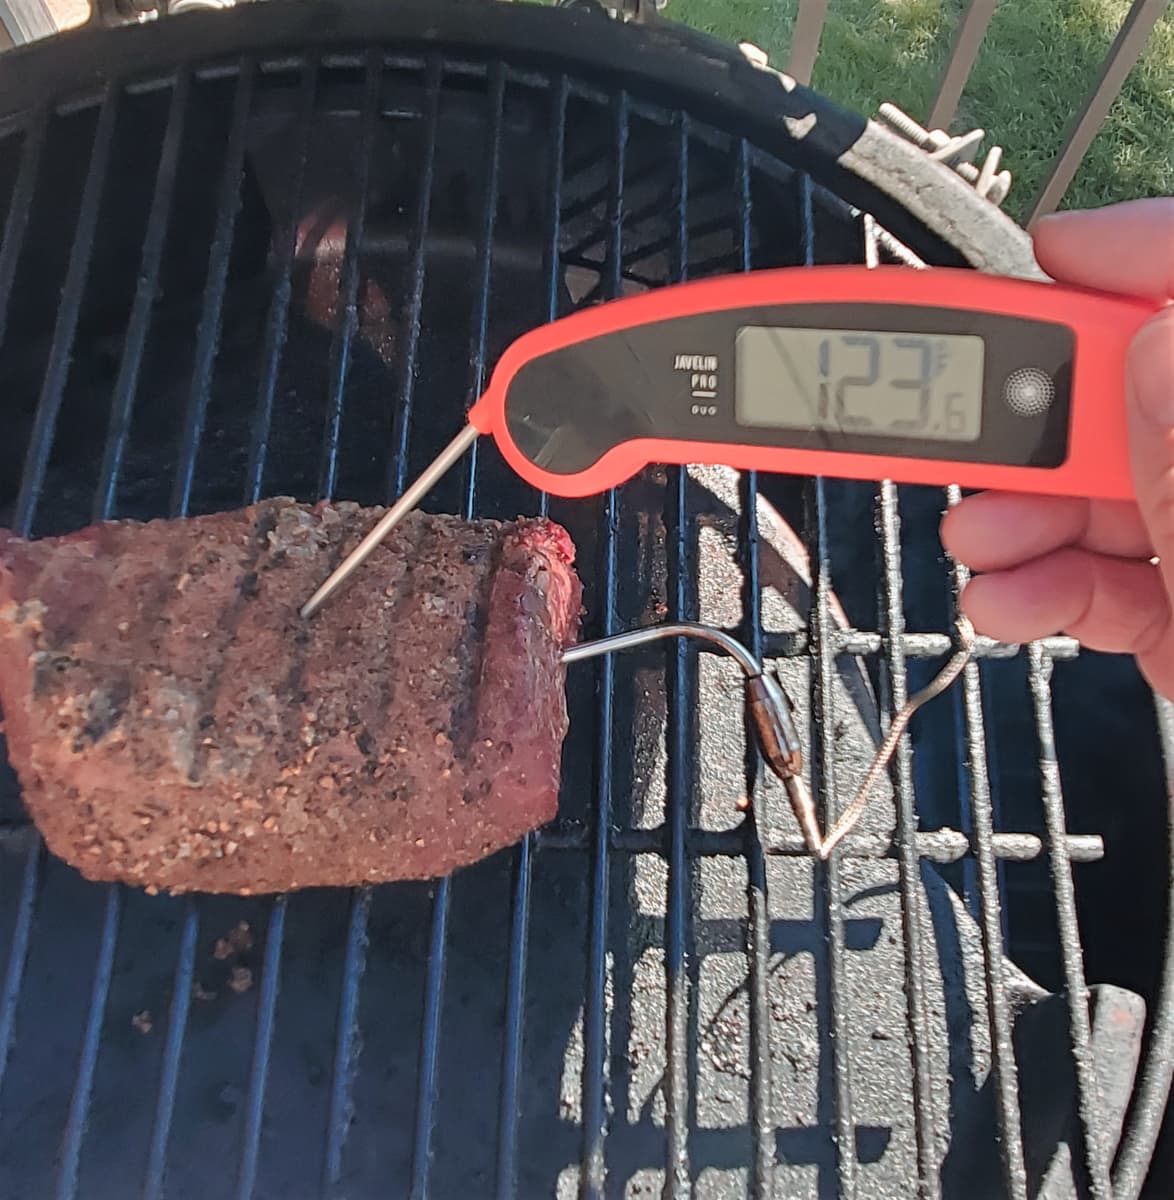 Checking the temp of a beef tenderloin with an instant read thermometer.  Temperature is 123 degrees.